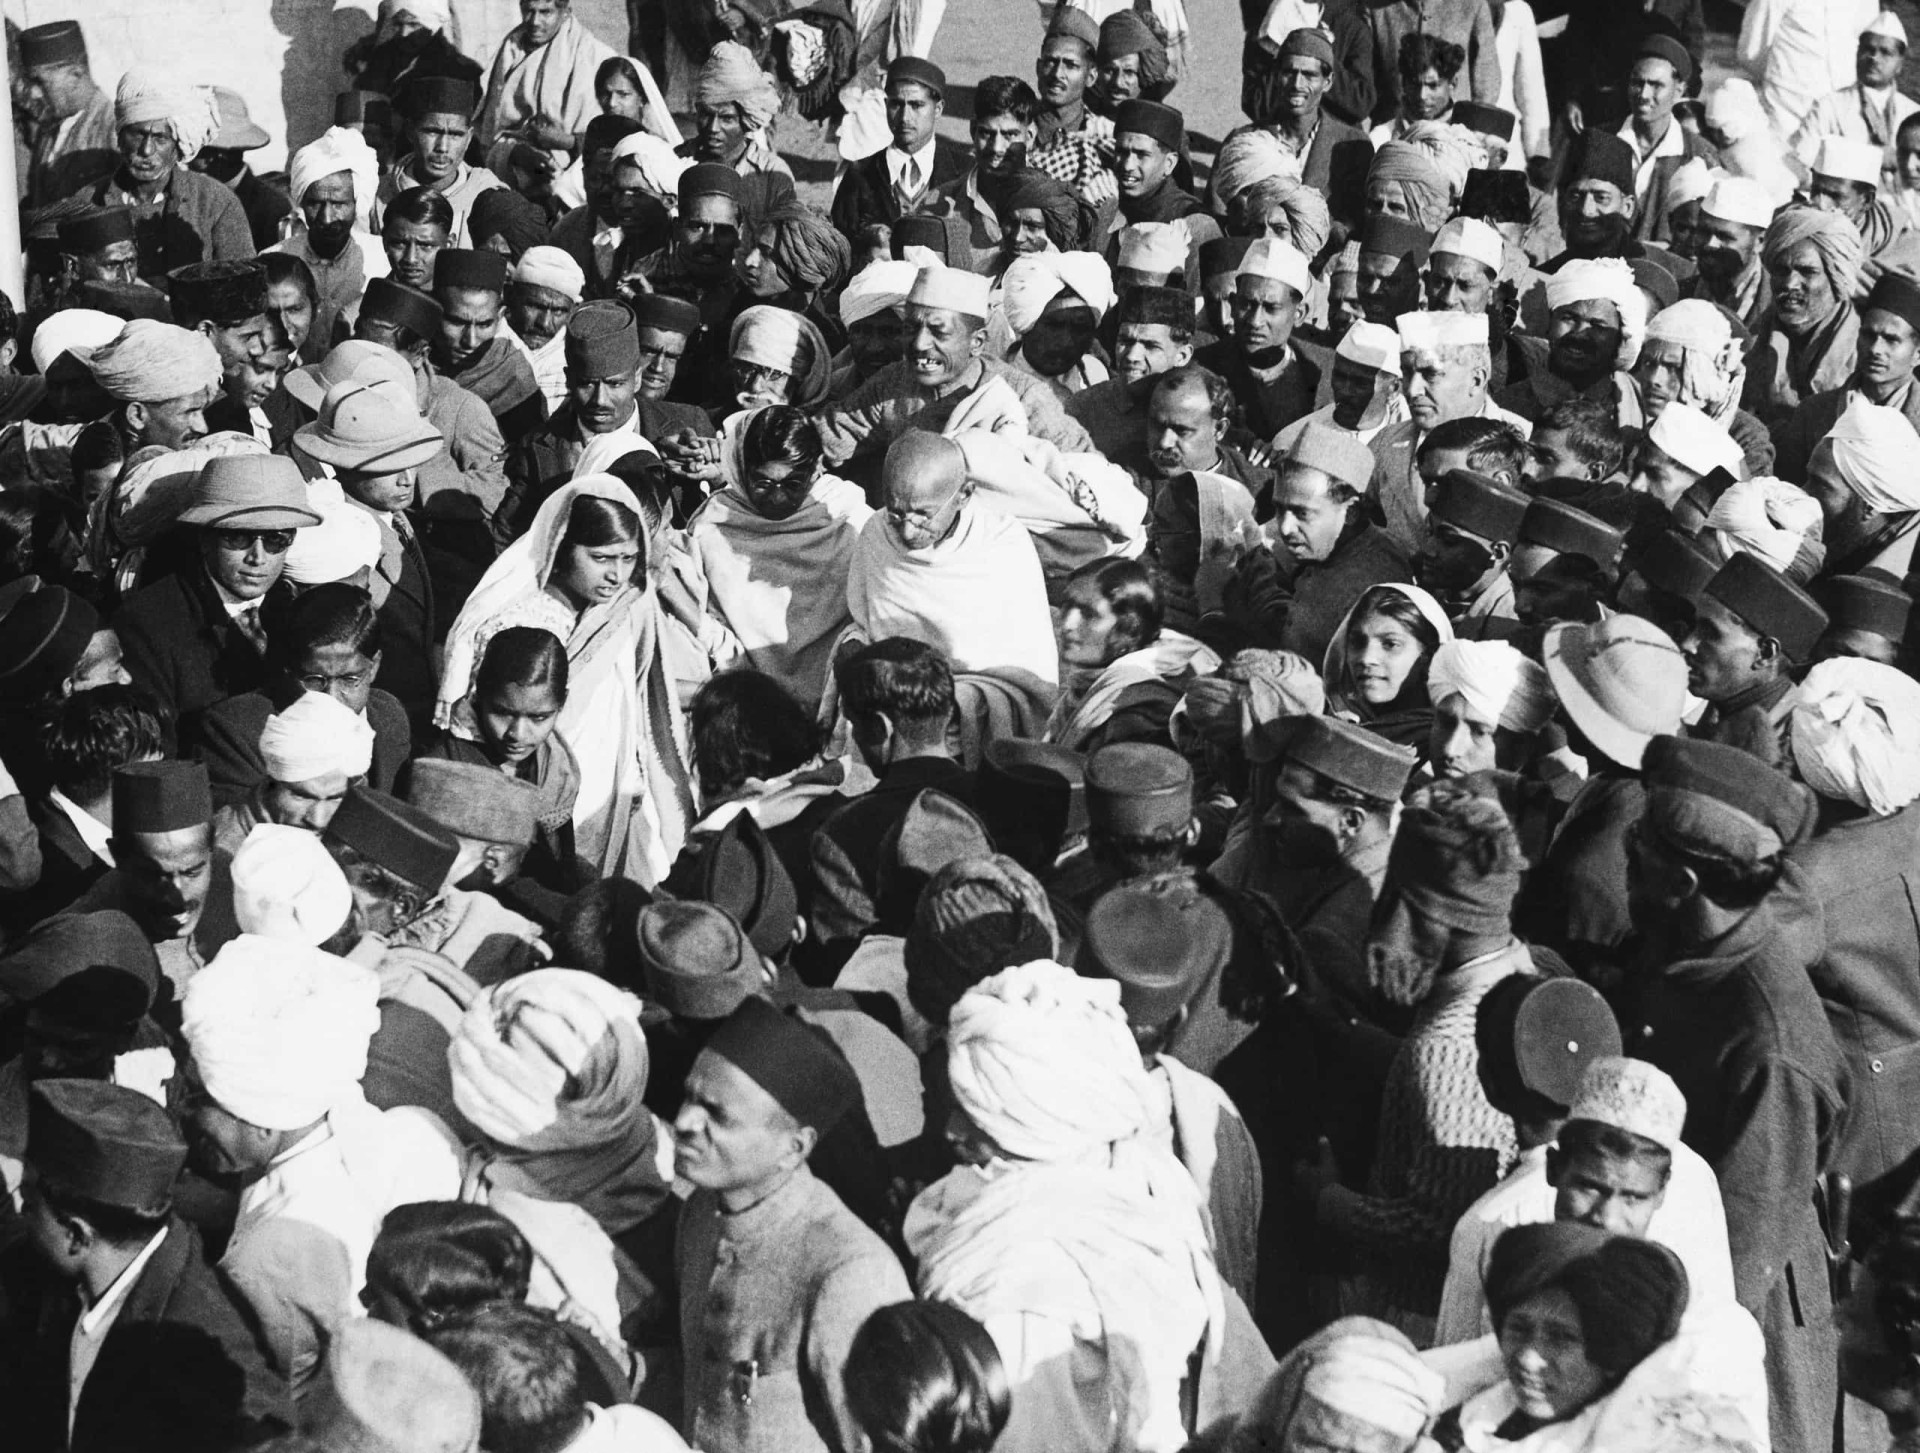 <p>In the wake of the passing of the Rowlatt Act and the Jallianwala Bagh massacre, Gandhi launched the non-cooperation movement on September 5, 1920, with the aim of self-governance and independence. </p><p><a href="https://www.msn.com/en-us/community/channel/vid-7xx8mnucu55yw63we9va2gwr7uihbxwc68fxqp25x6tg4ftibpra?cvid=94631541bc0f4f89bfd59158d696ad7e">Follow us and access great exclusive content every day</a></p>